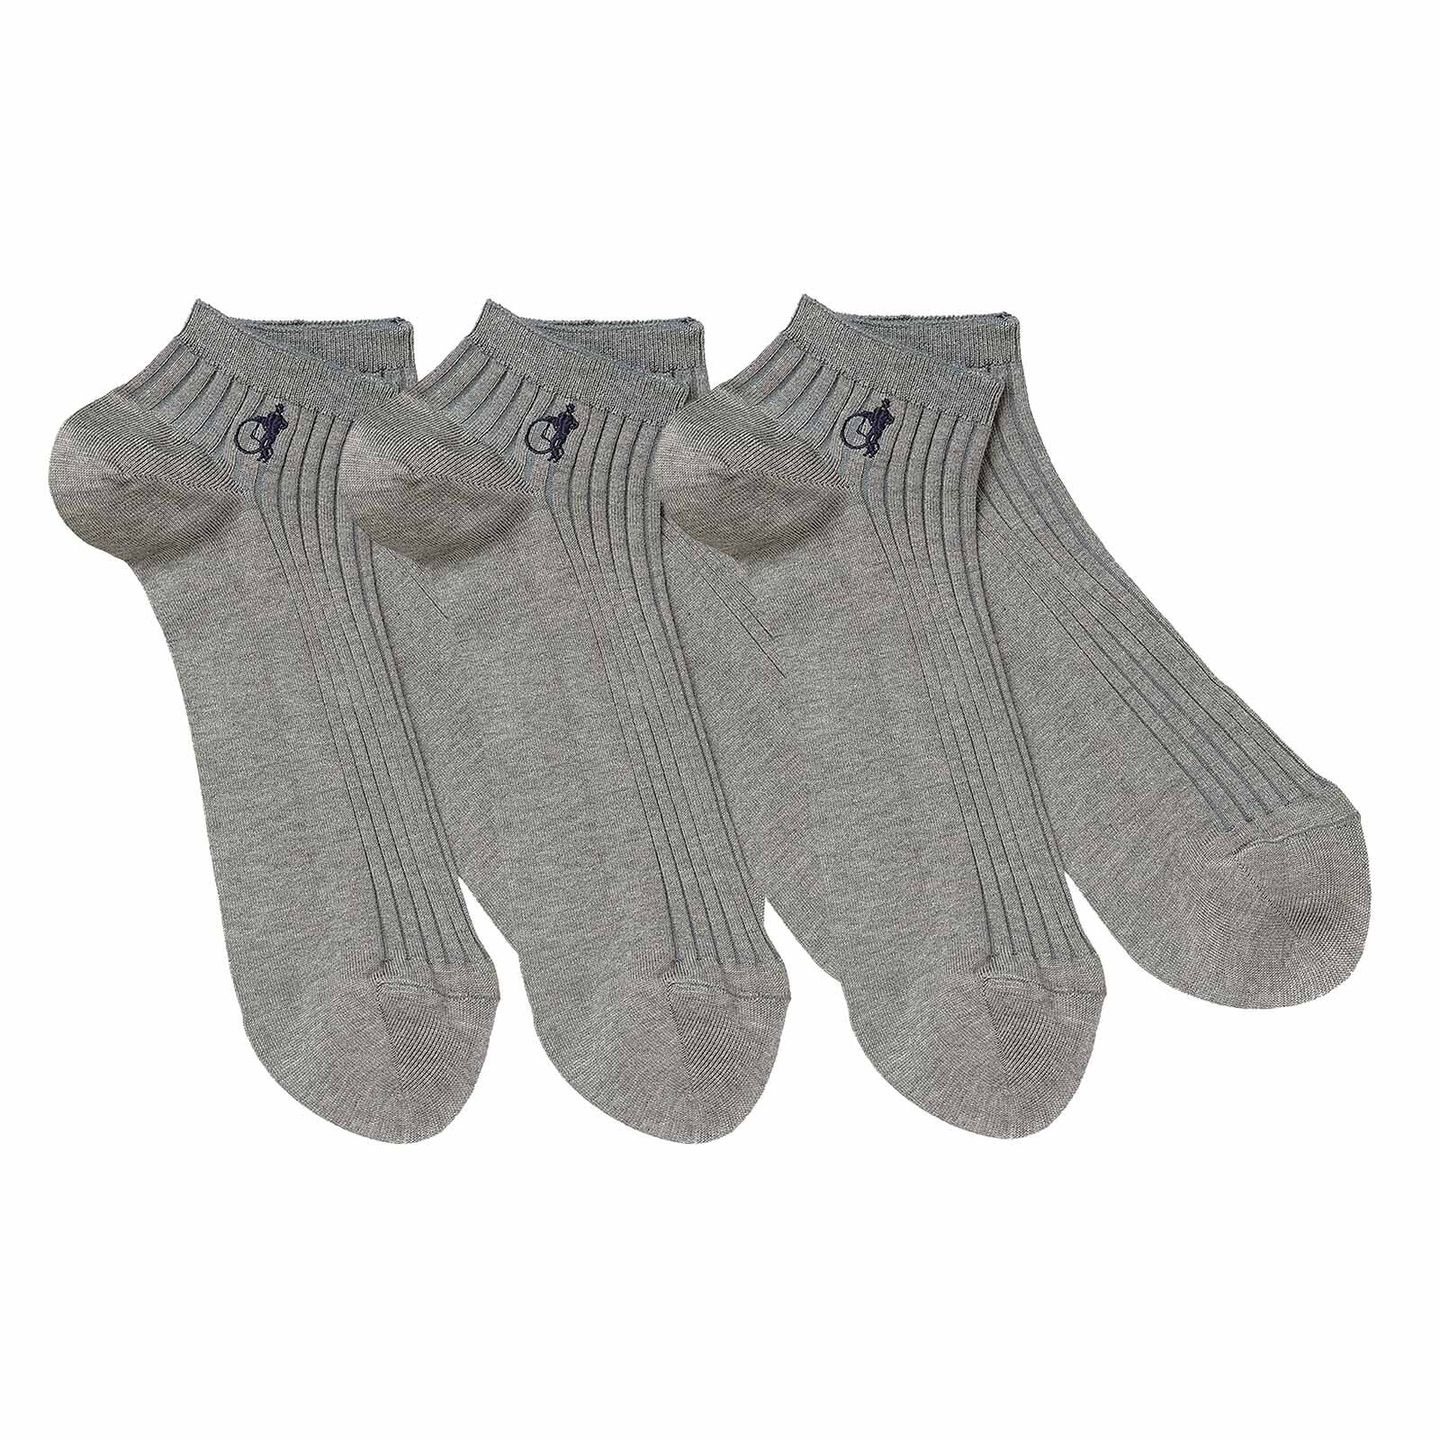 3 pair of light grey socks lined up next to each other